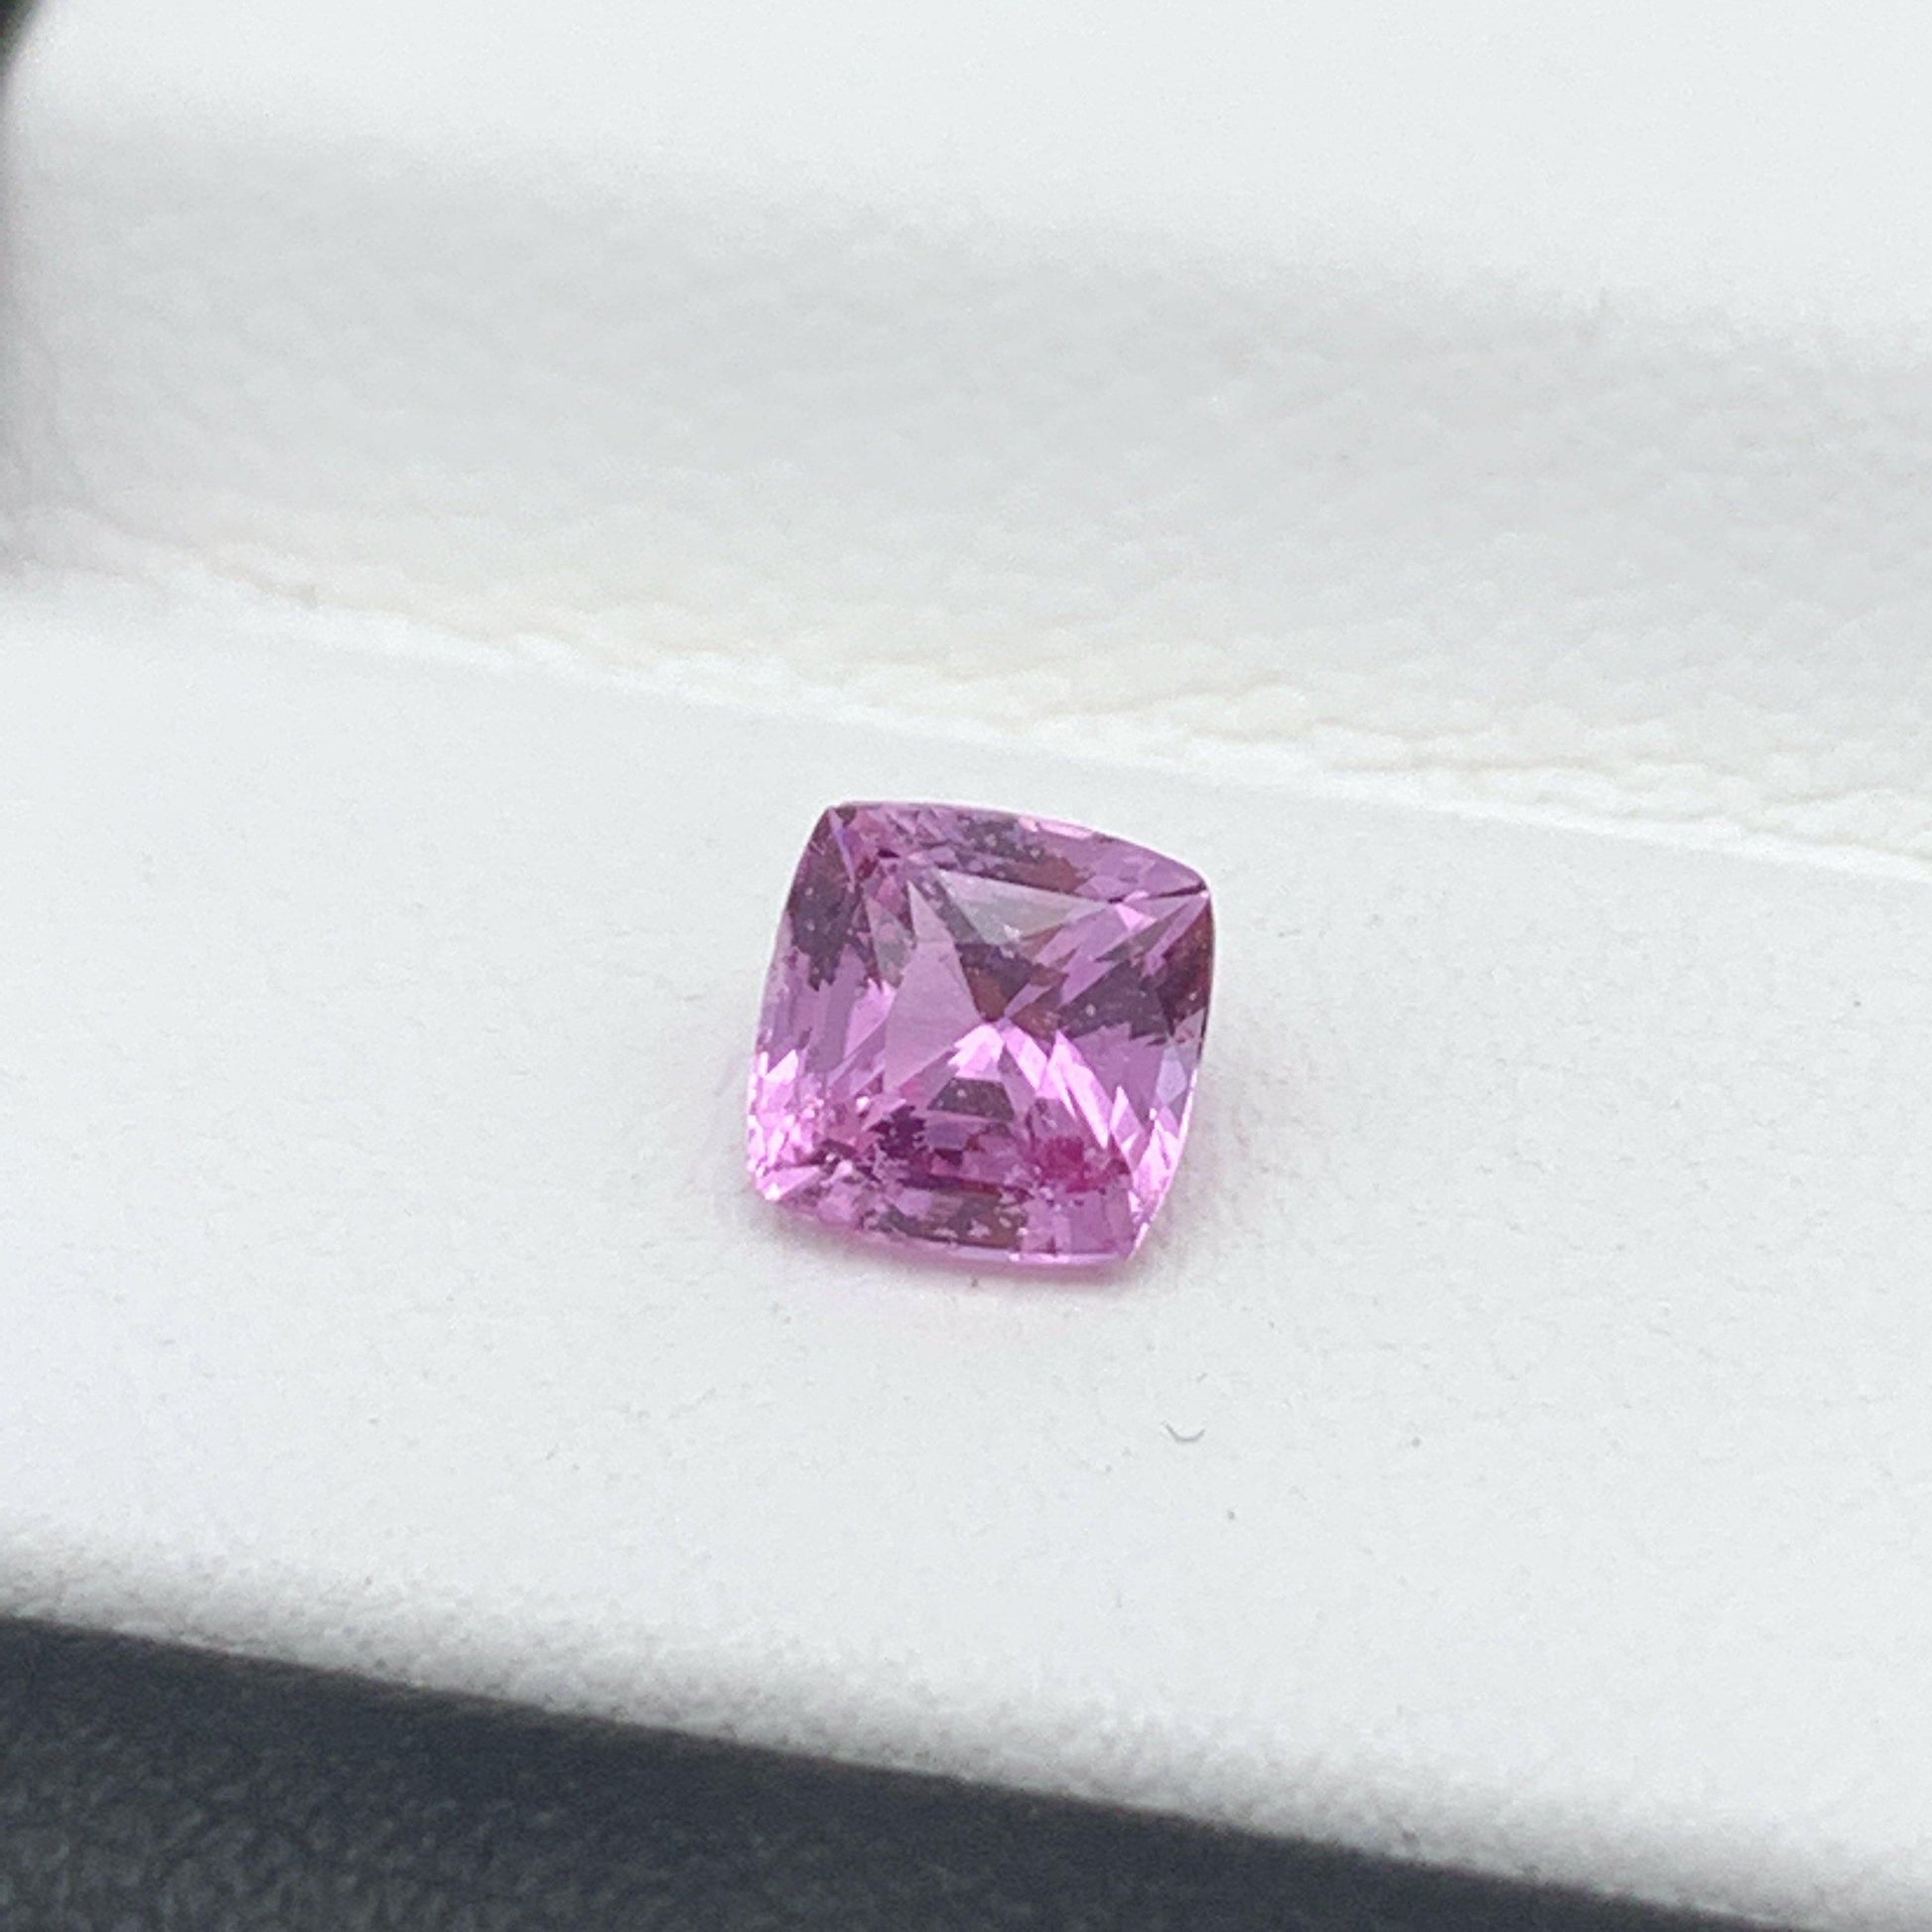 0.83CT Natural Pink Sapphire 